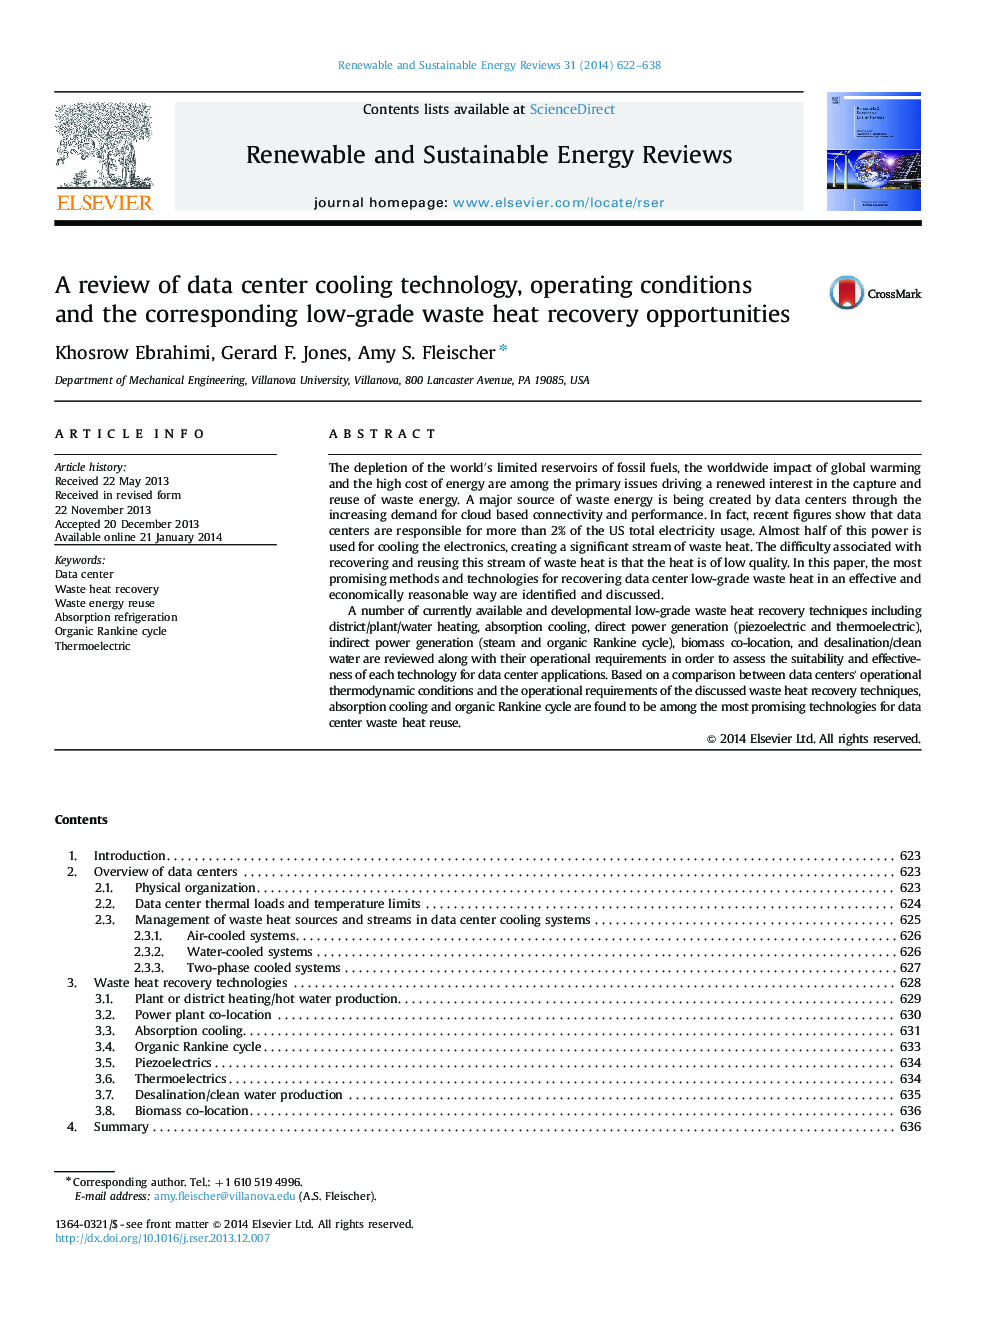 A review of data center cooling technology, operating conditions and the corresponding low-grade waste heat recovery opportunities